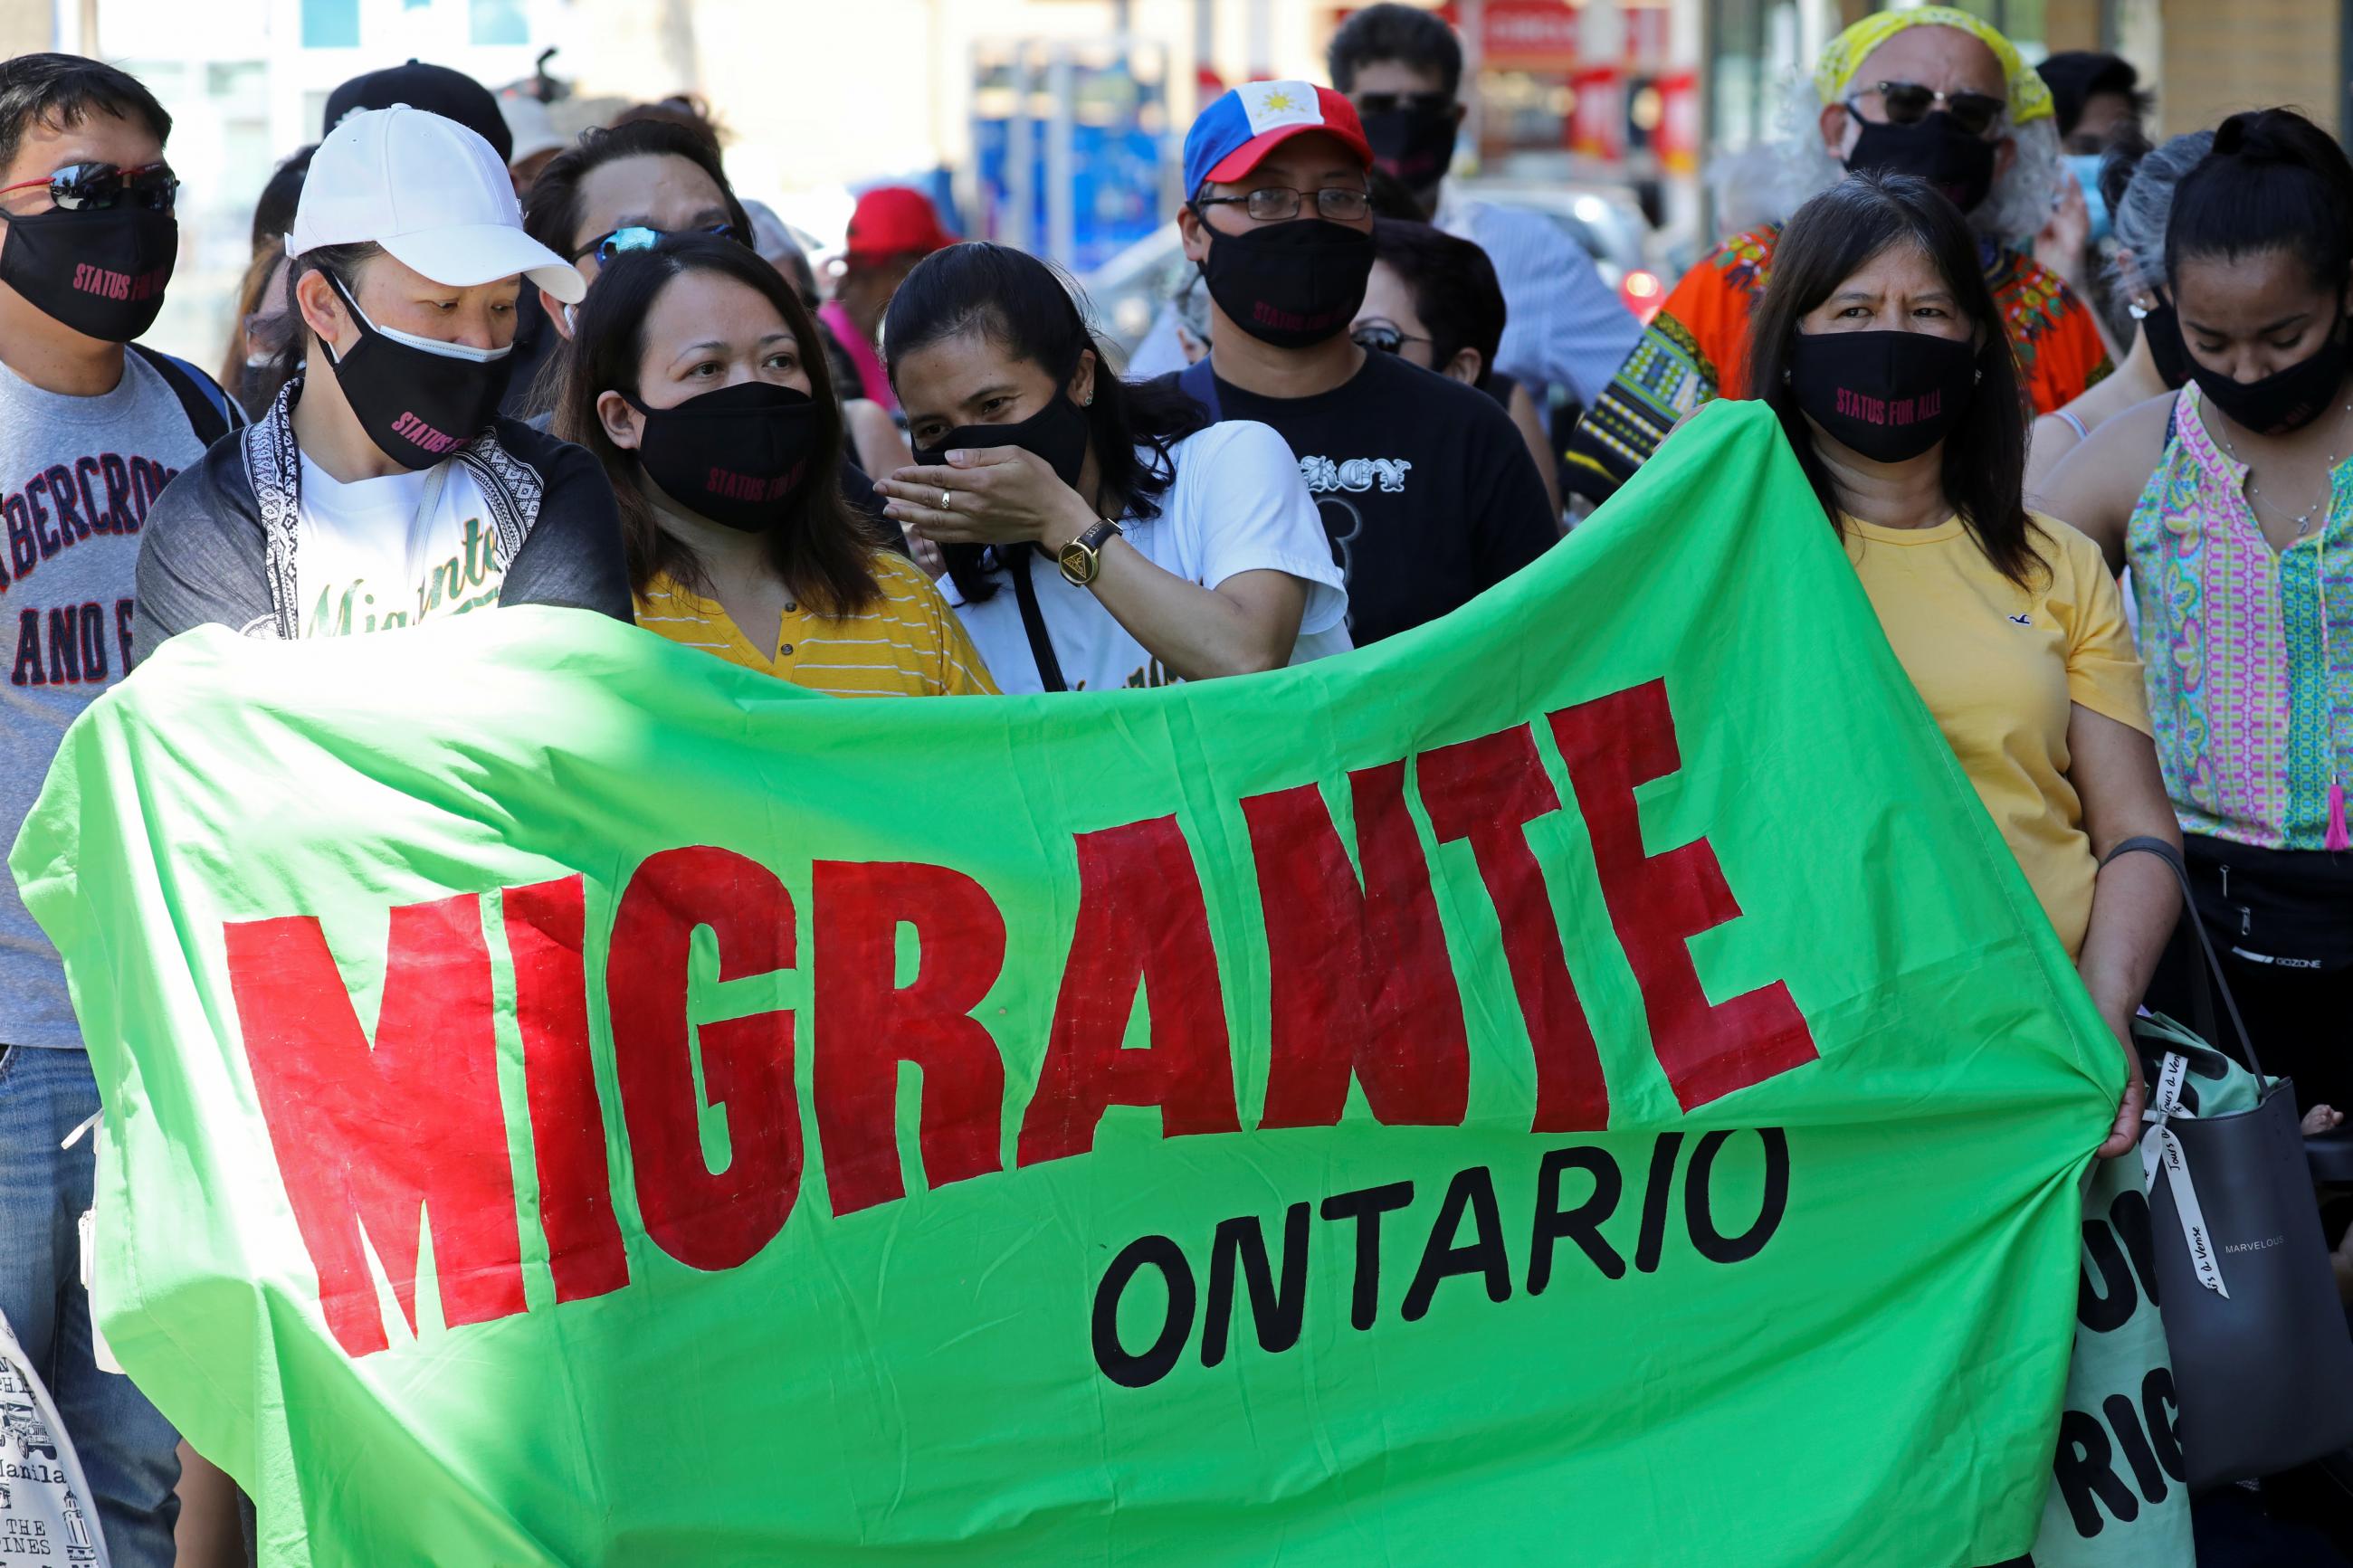 Migrants, refugees, undocumented workers and their supporters rally outside the office Canada's Immigration Minister Marco Mendicino in Toronto, Ontario, Canada on July 4, 2020.